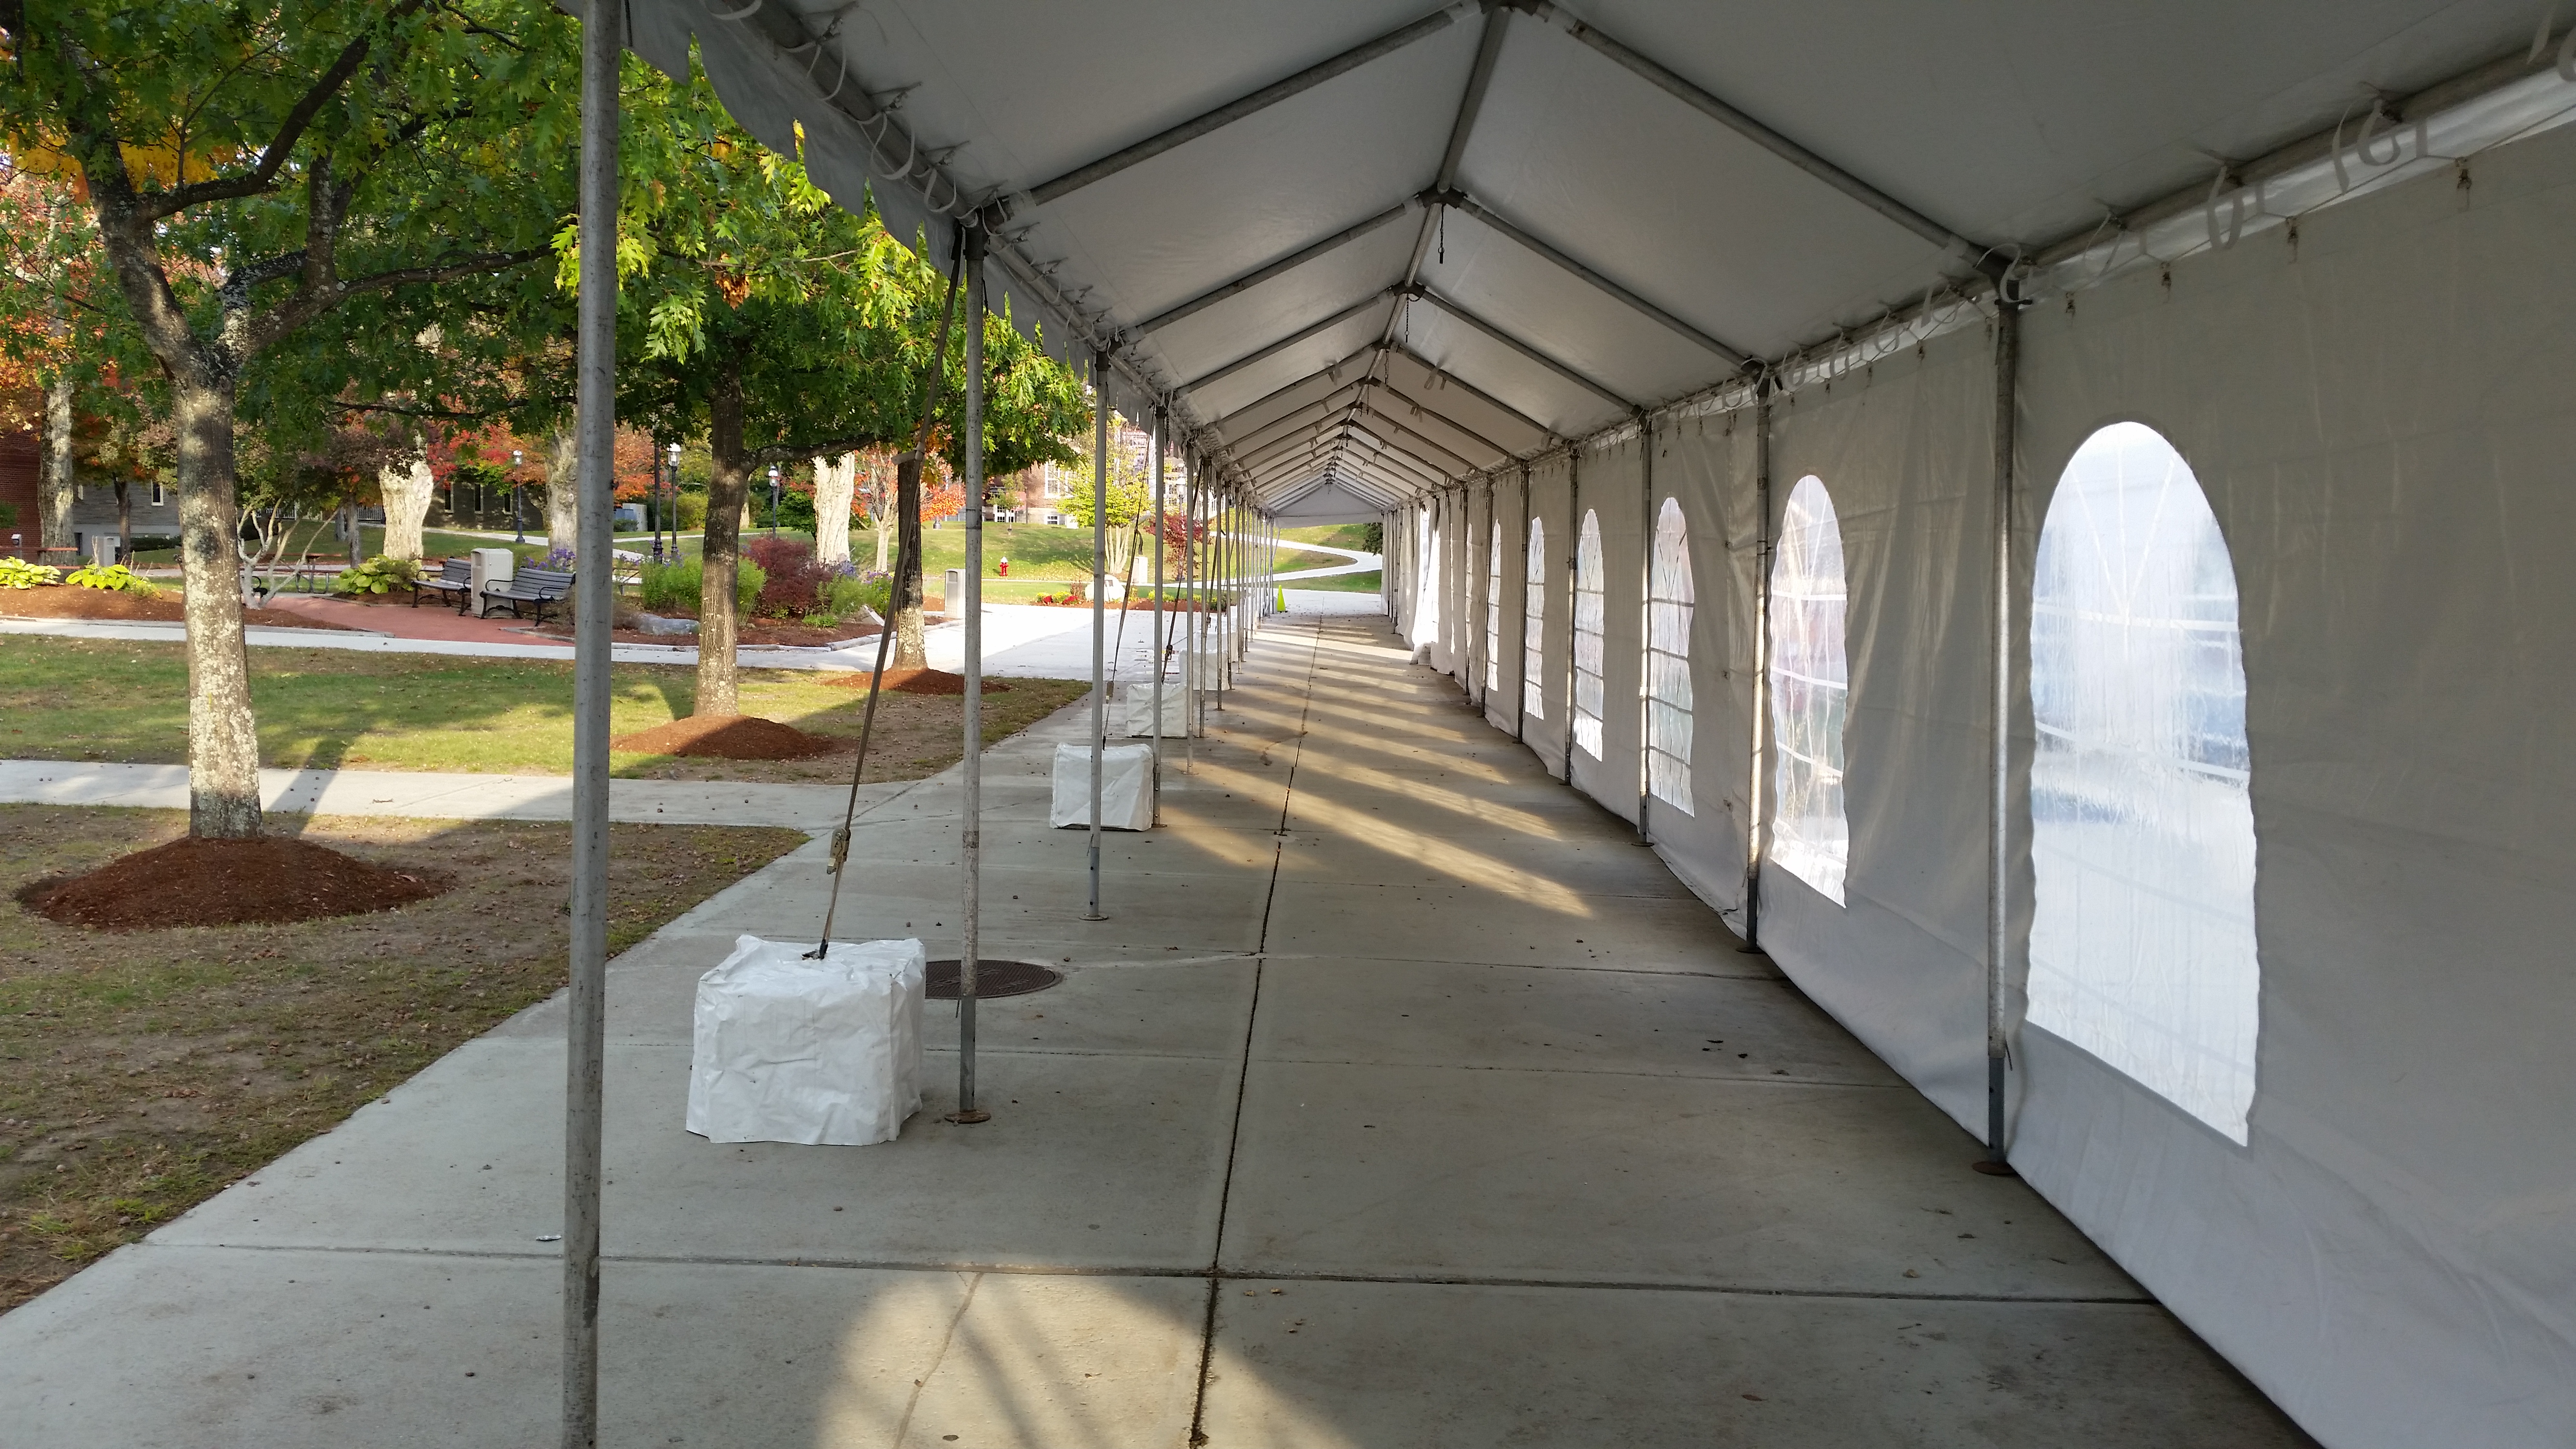 9' x 165' tent secured with Block and Roll ballast system